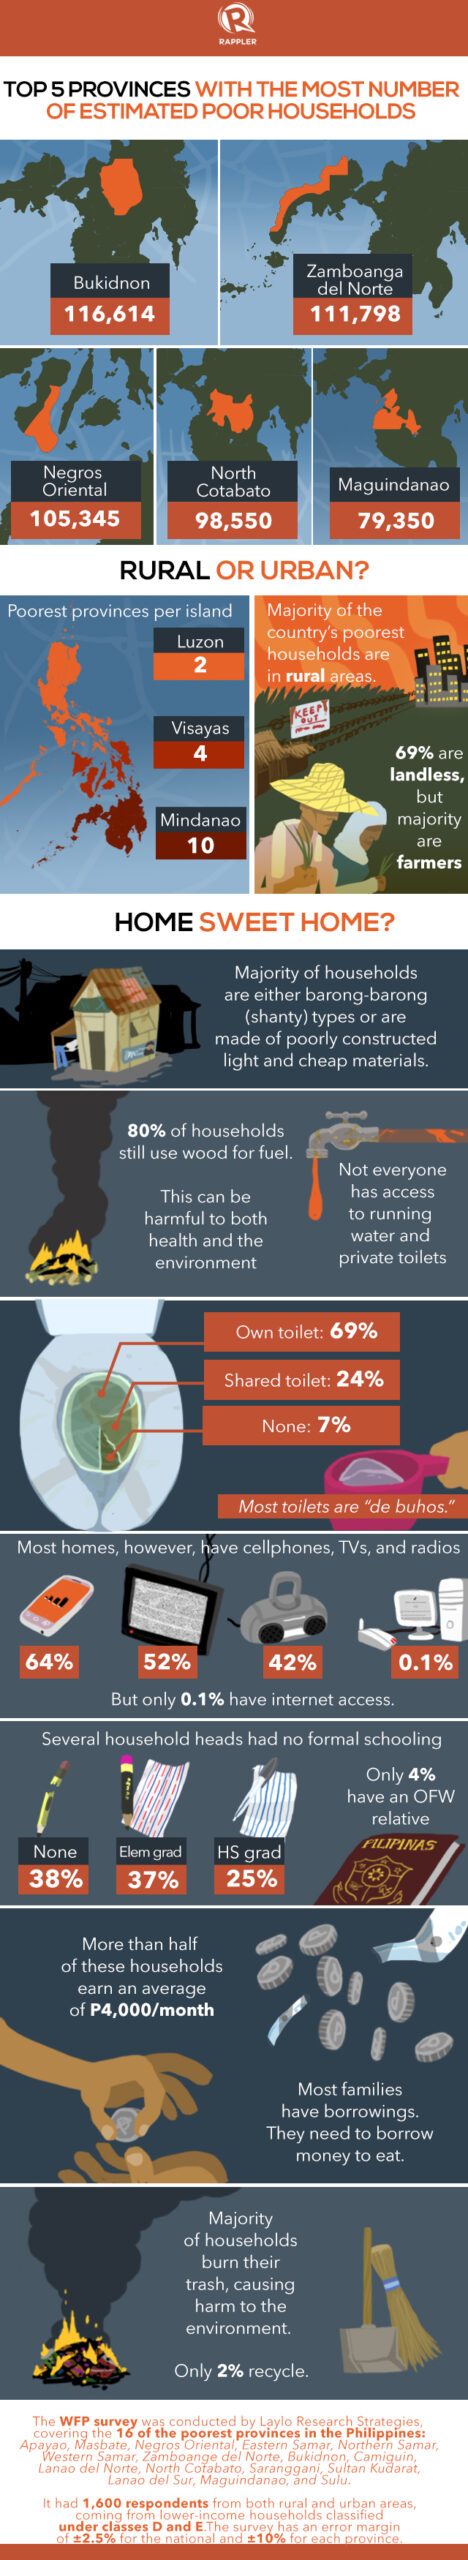 INFOGRAPHIC: Inside the poorest PH homes